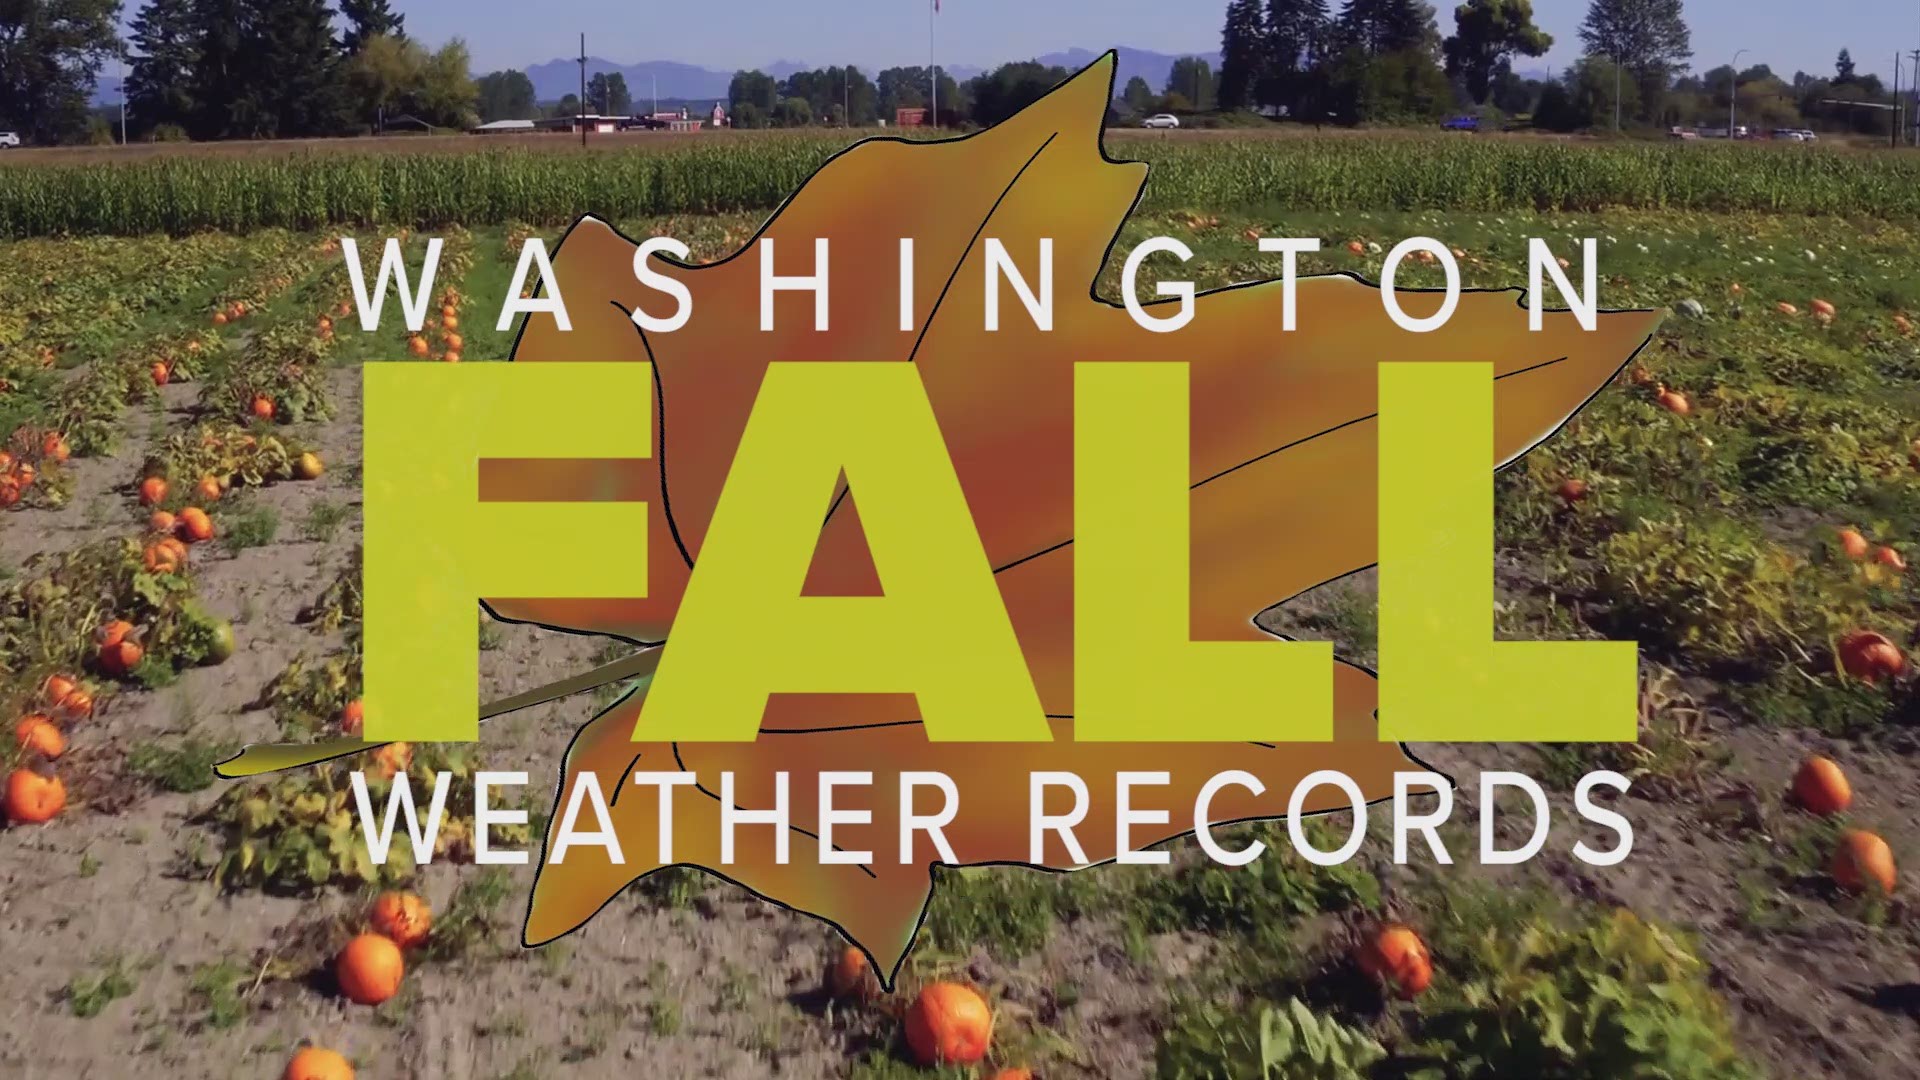 A look at some of the extreme weather records set in Washington during autumn.